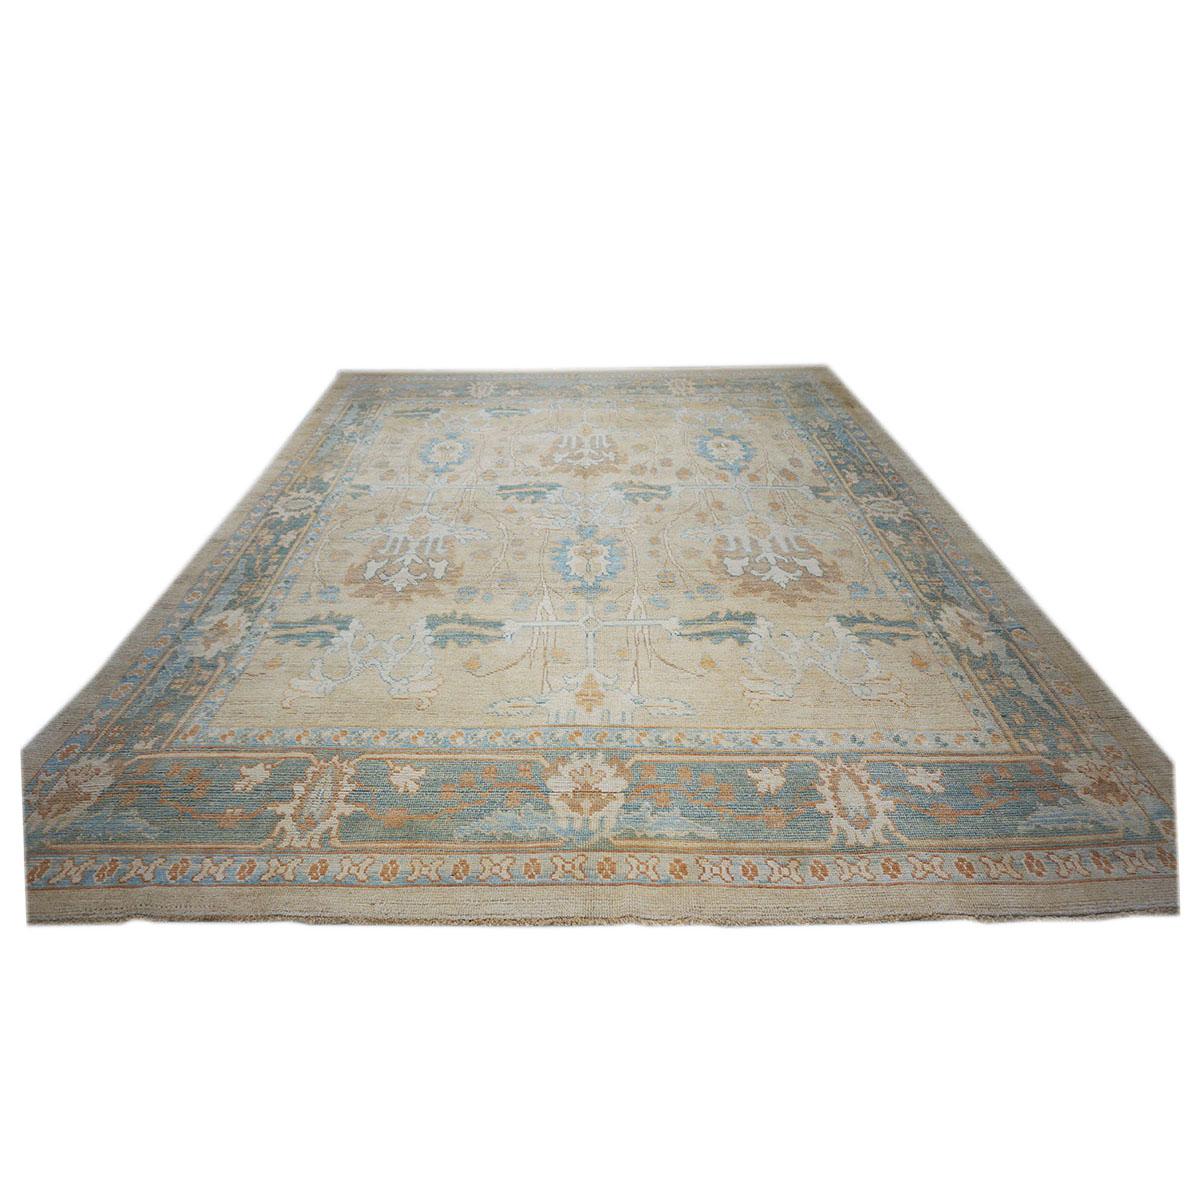 Hand-Woven 21st Century William Morris Donegal Carpet 11x15 Tan, Light Blue and Orange Rug For Sale